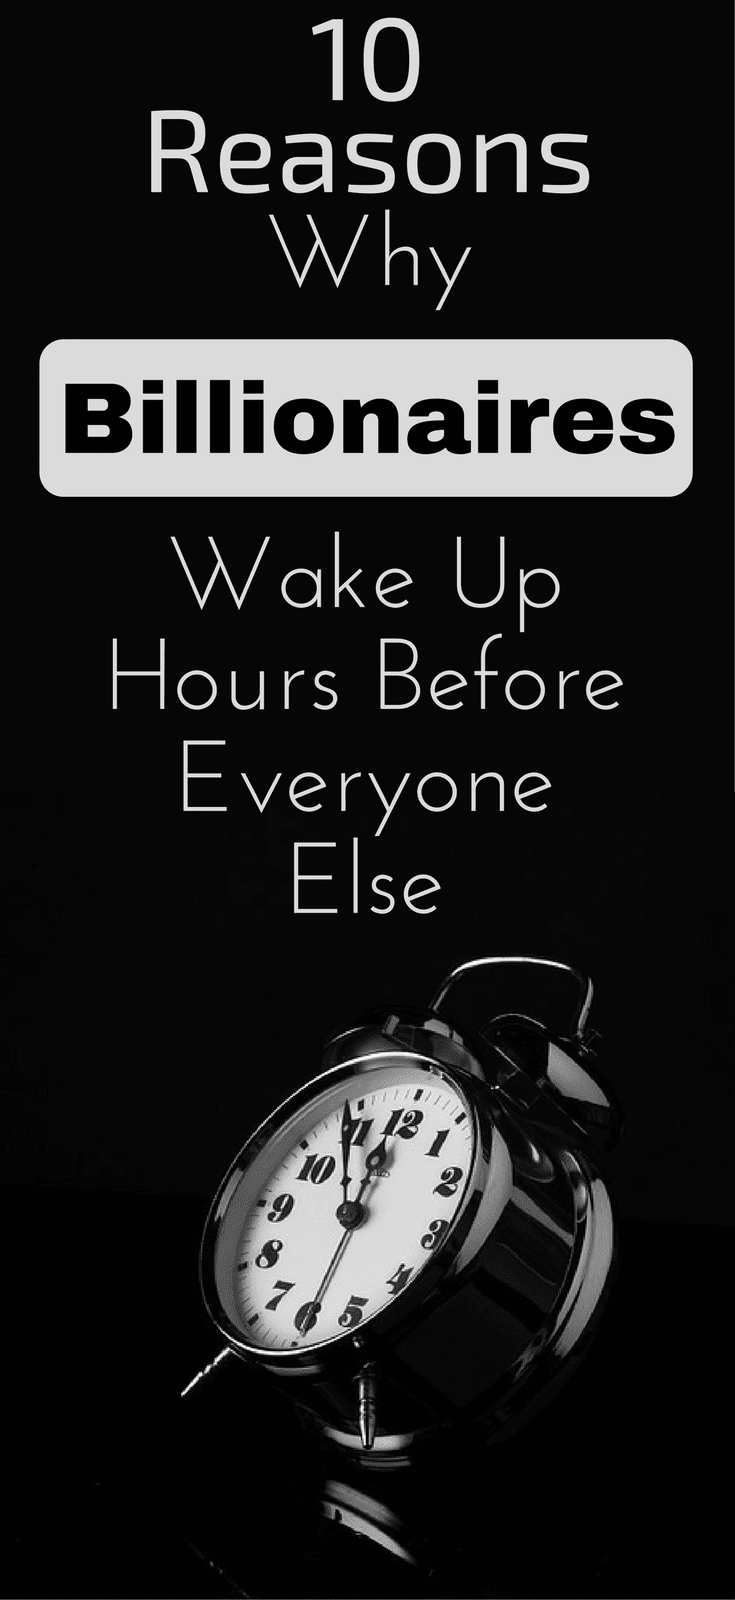 10 Reasons Why Billionaires Wake Up Hours Before Everyone Else